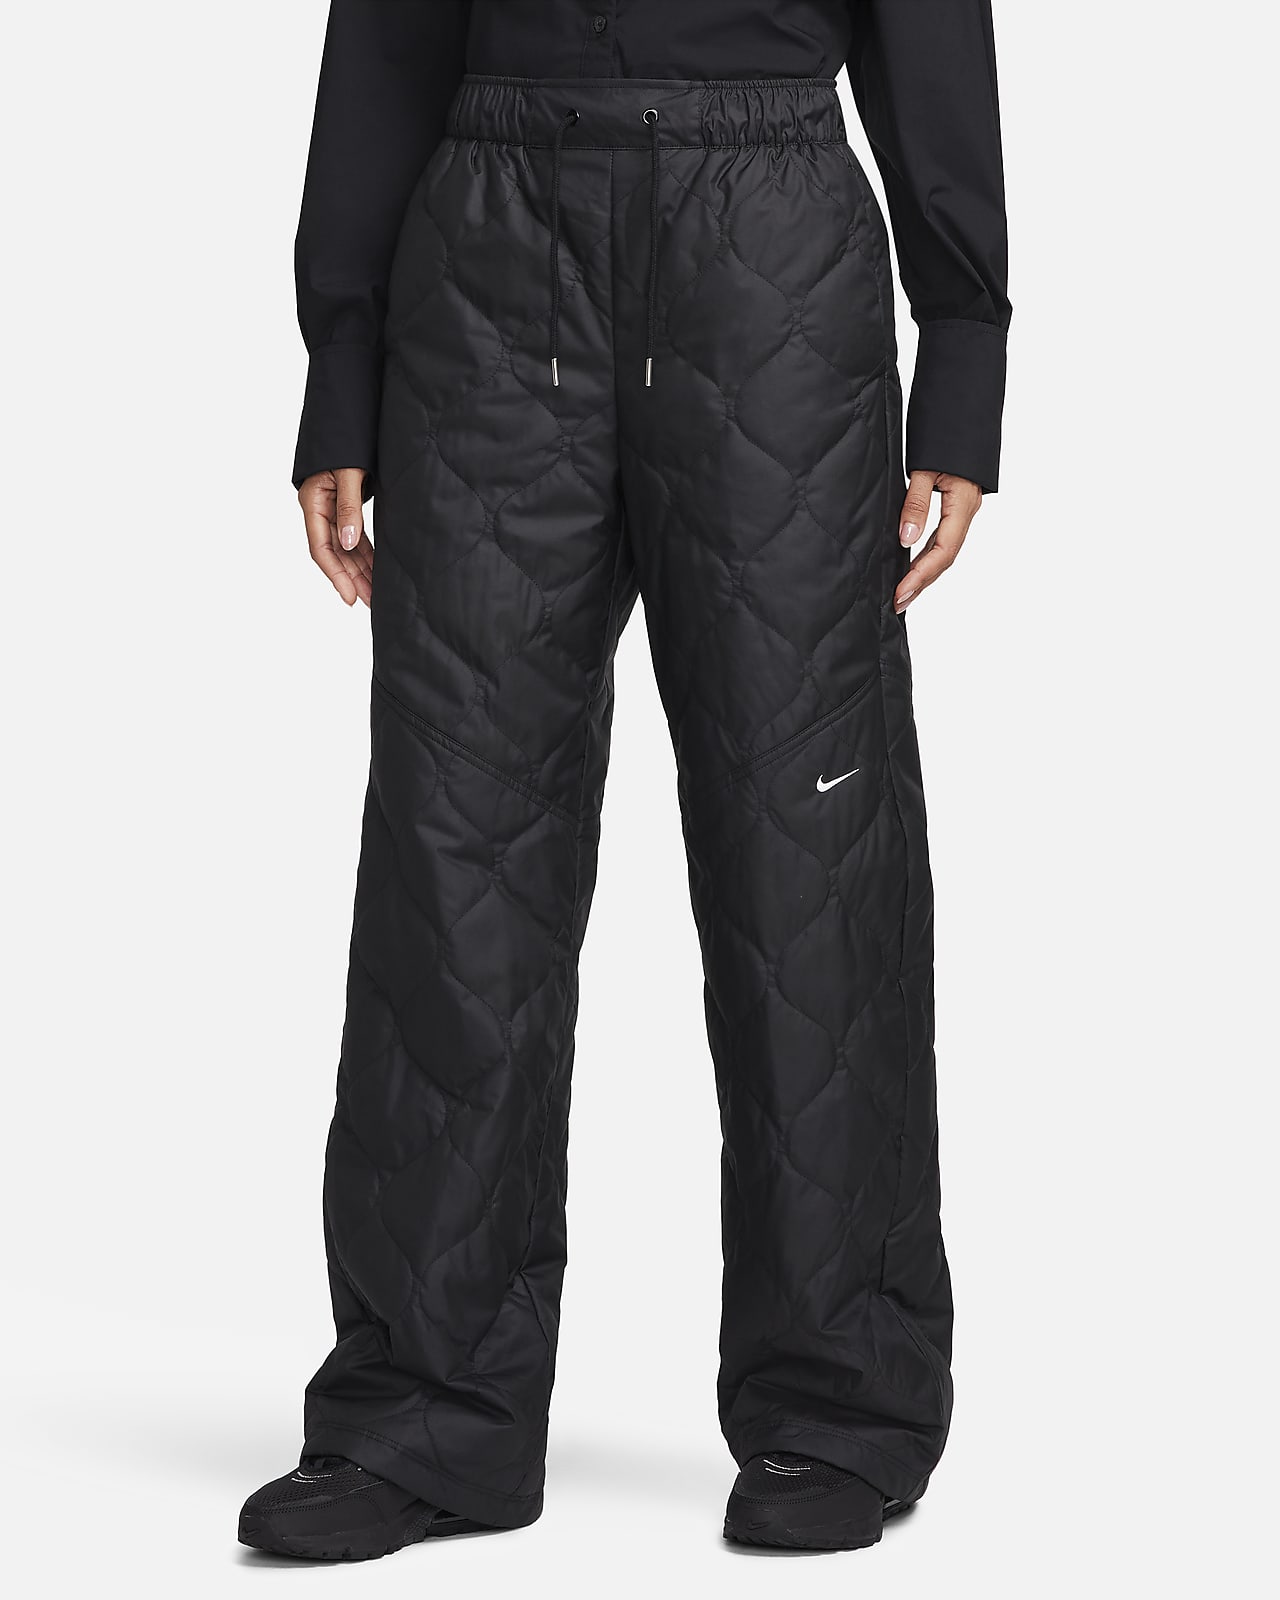 https://static.nike.com/a/images/t_PDP_1280_v1/f_auto,q_auto:eco/3a73f321-5c8d-4895-a01a-0697b61006c8/pantalon-taille-haute-matelasse-a-ourlet-ouvert-sportswear-essential-pour-2mpCf1.png